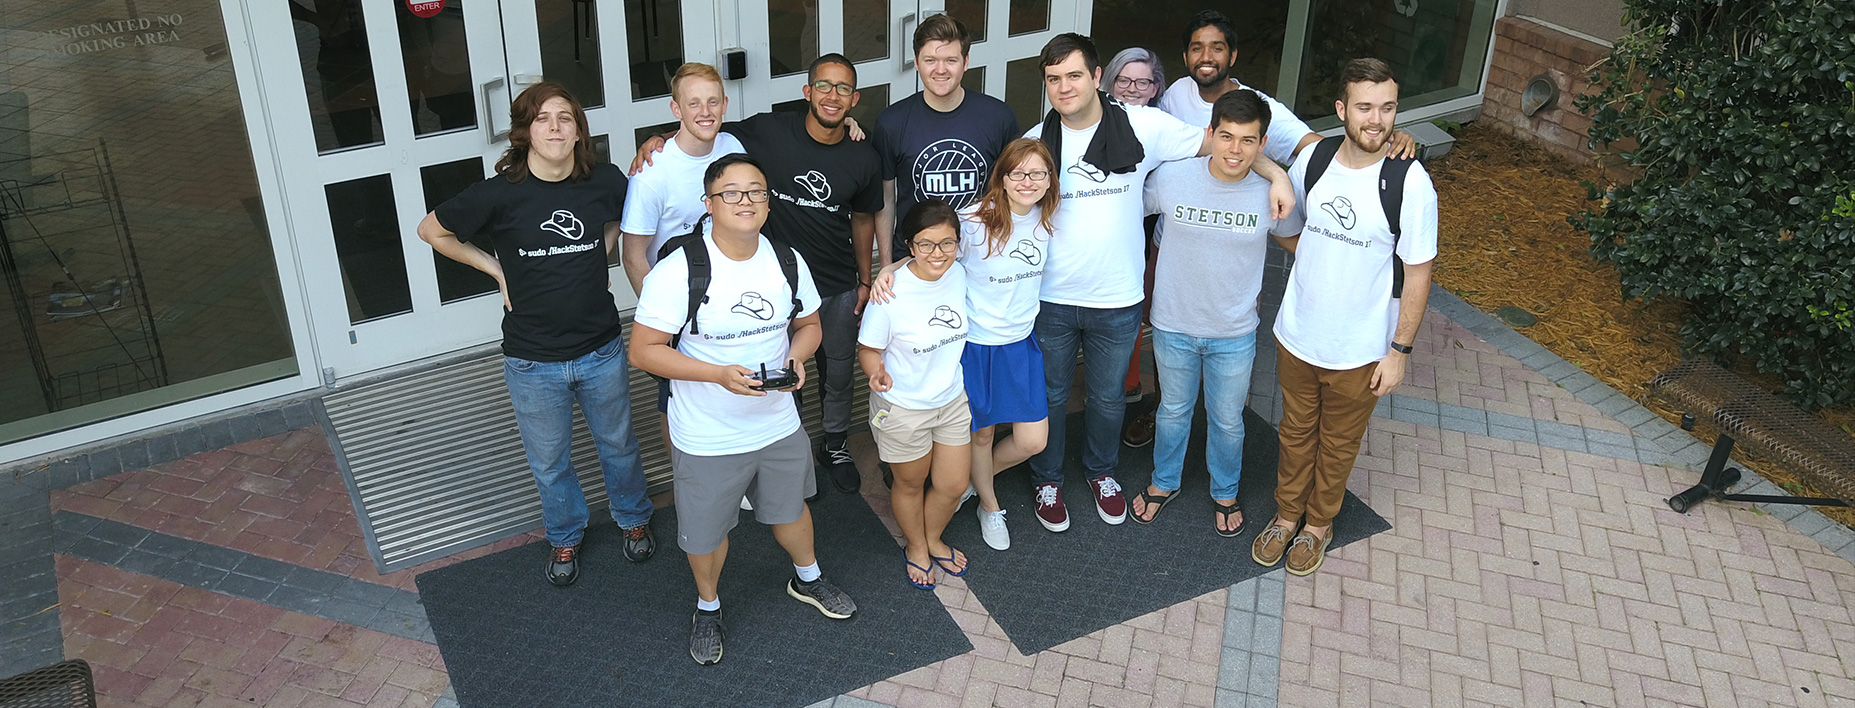 A large group shot of students wearing their hackathon t-shirts.